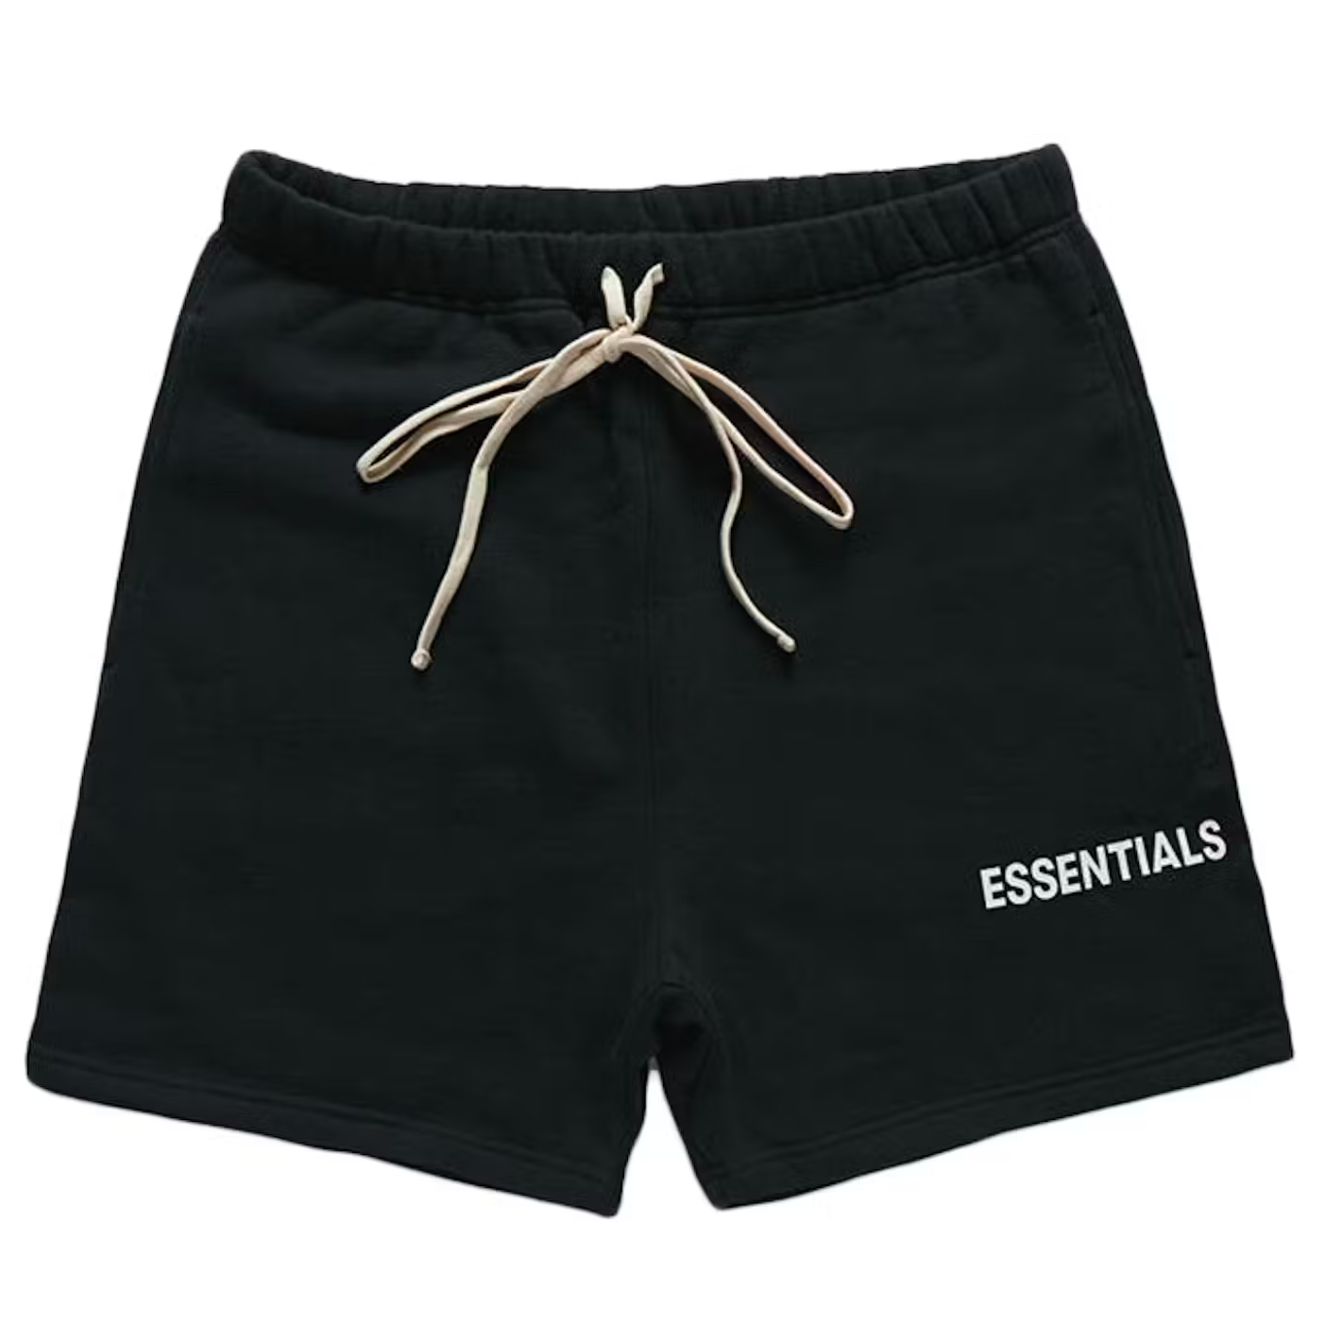 Fear of God Essentials Graphic Sweat Shorts 'Caviar' | Waves Never Die | Essentials | Shorts